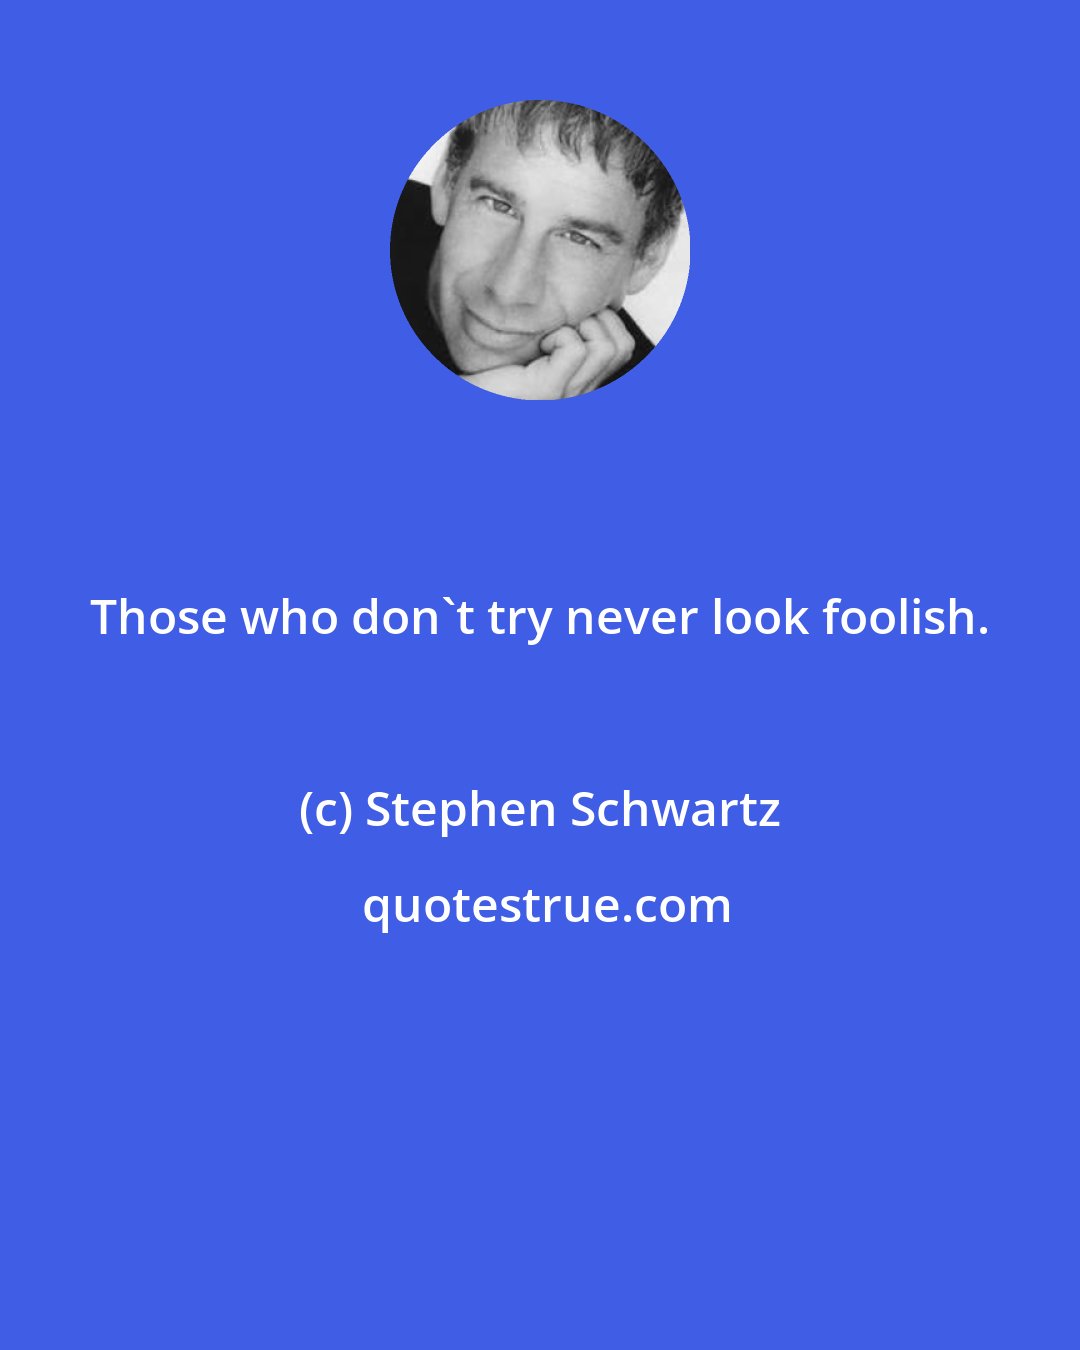 Stephen Schwartz: Those who don't try never look foolish.